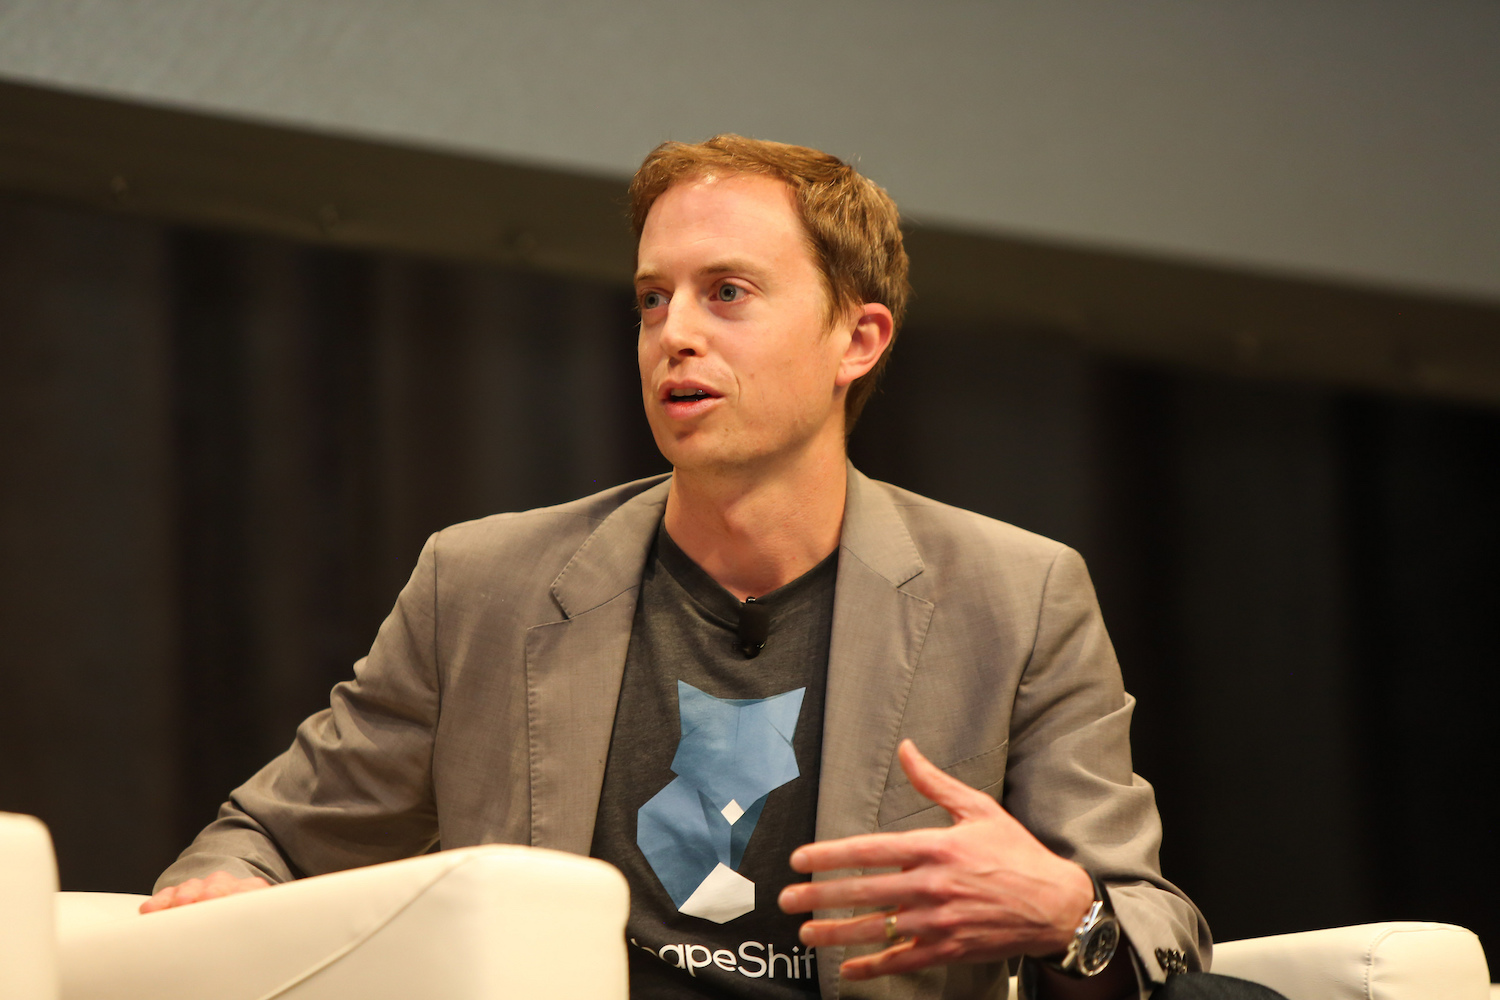 ShapeShift Founder Says Crypto Exchange Service Will Support Libra